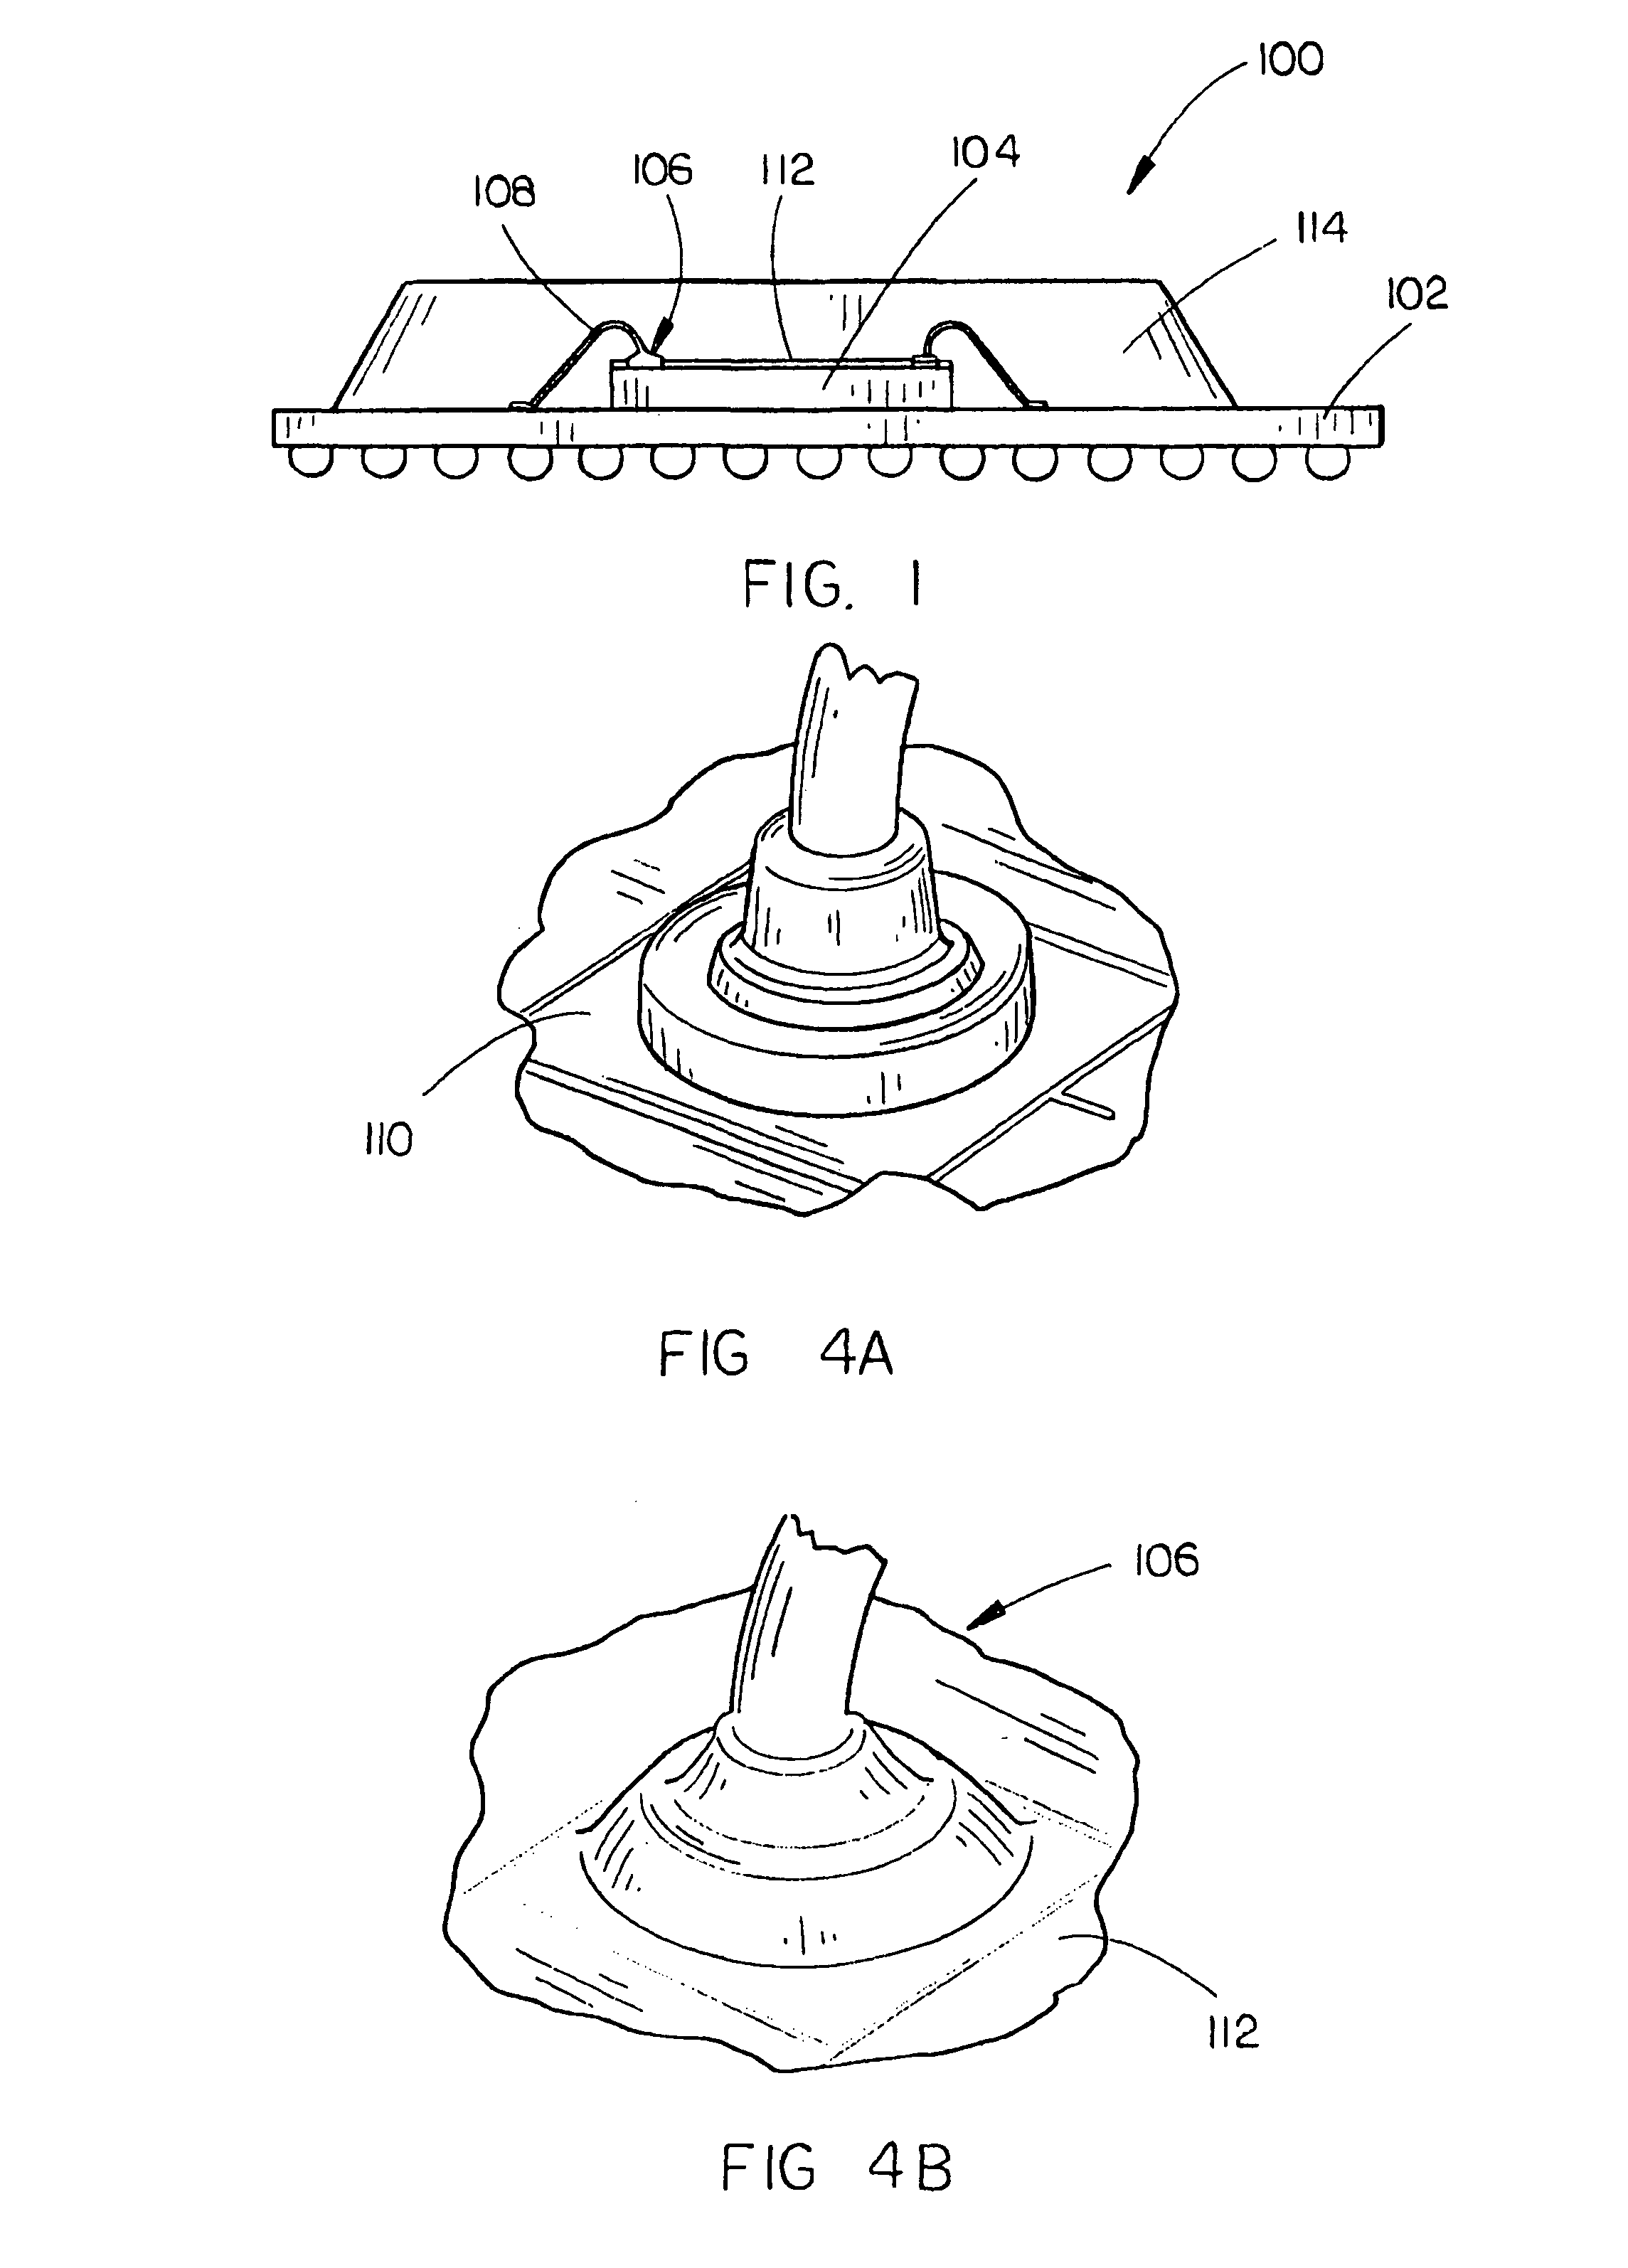 Method for providing near-hermetically coated integrated circuit assemblies